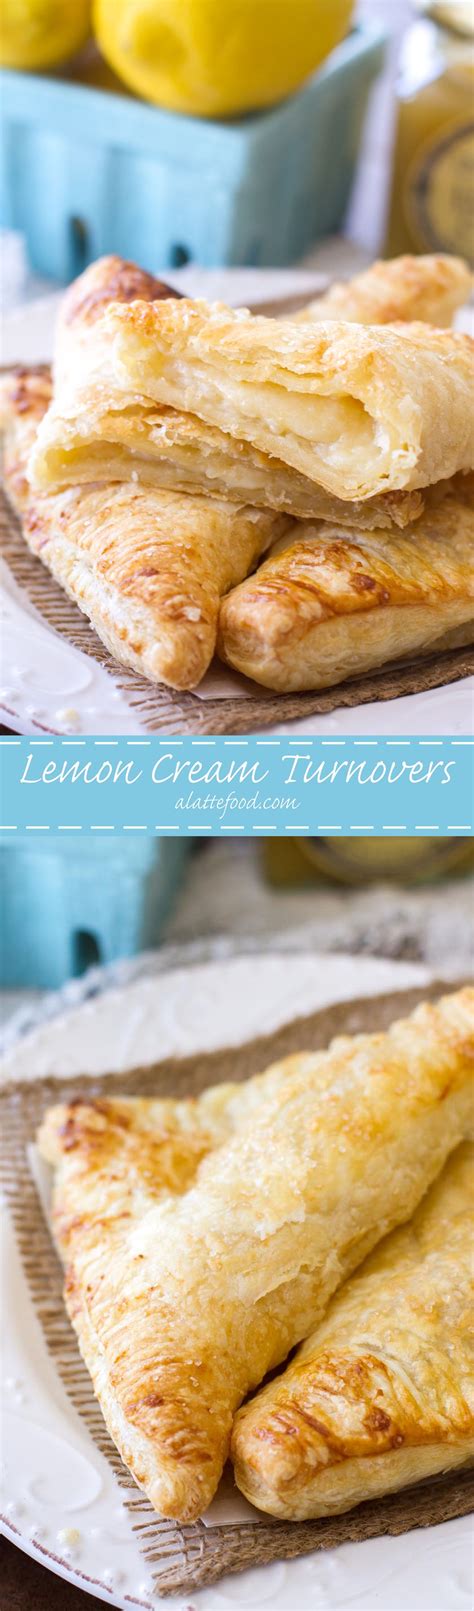 This Easy Lemon Cream Turnover Recipe Uses Only 6 Ingredients Making